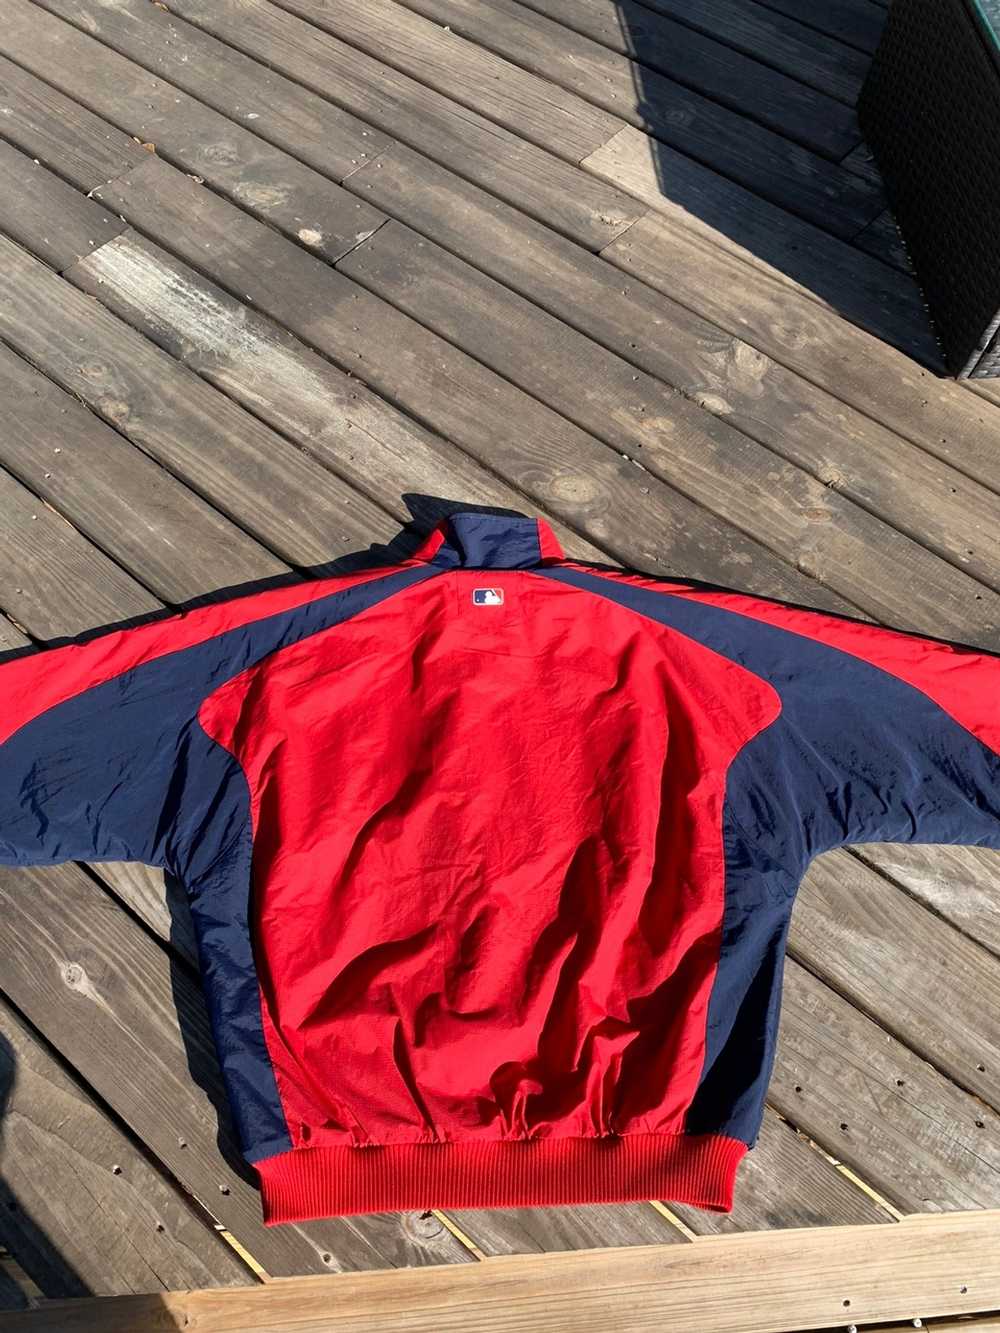 Majestic Red St. Louis Cardinals Cold Weather Pitcher's Jacket Adult S -  Shop Thrift KC